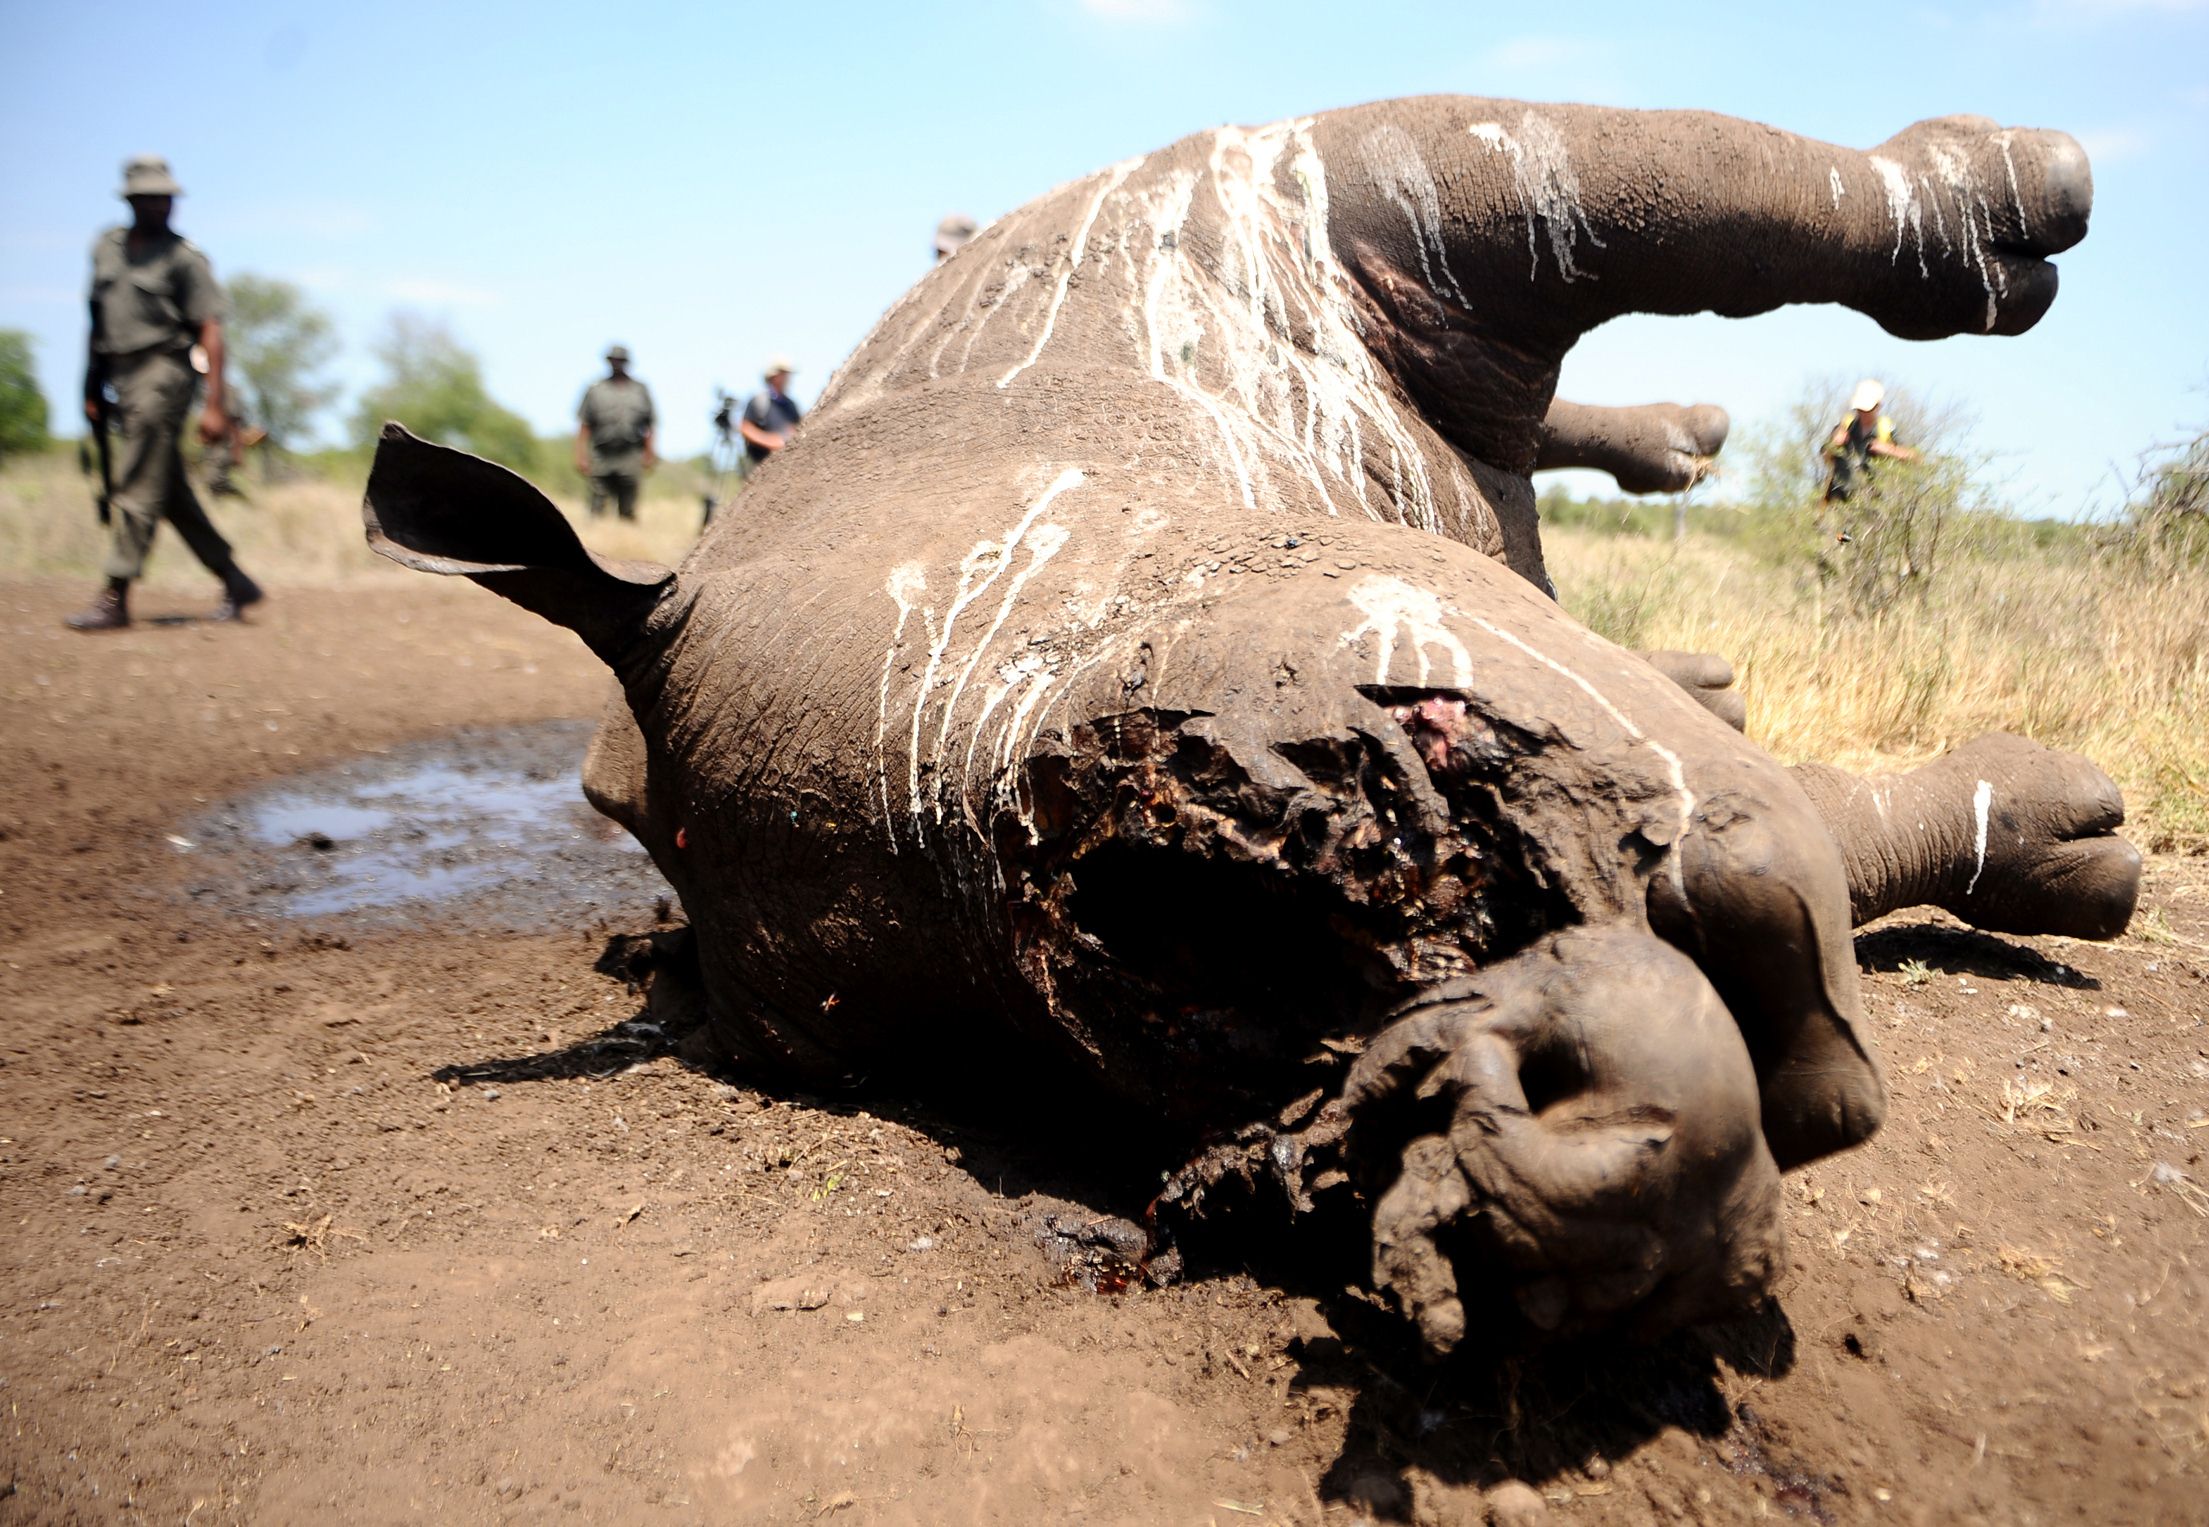 A rhino killed by poachers in Kruger National Park, South Africa. Photo: AFP